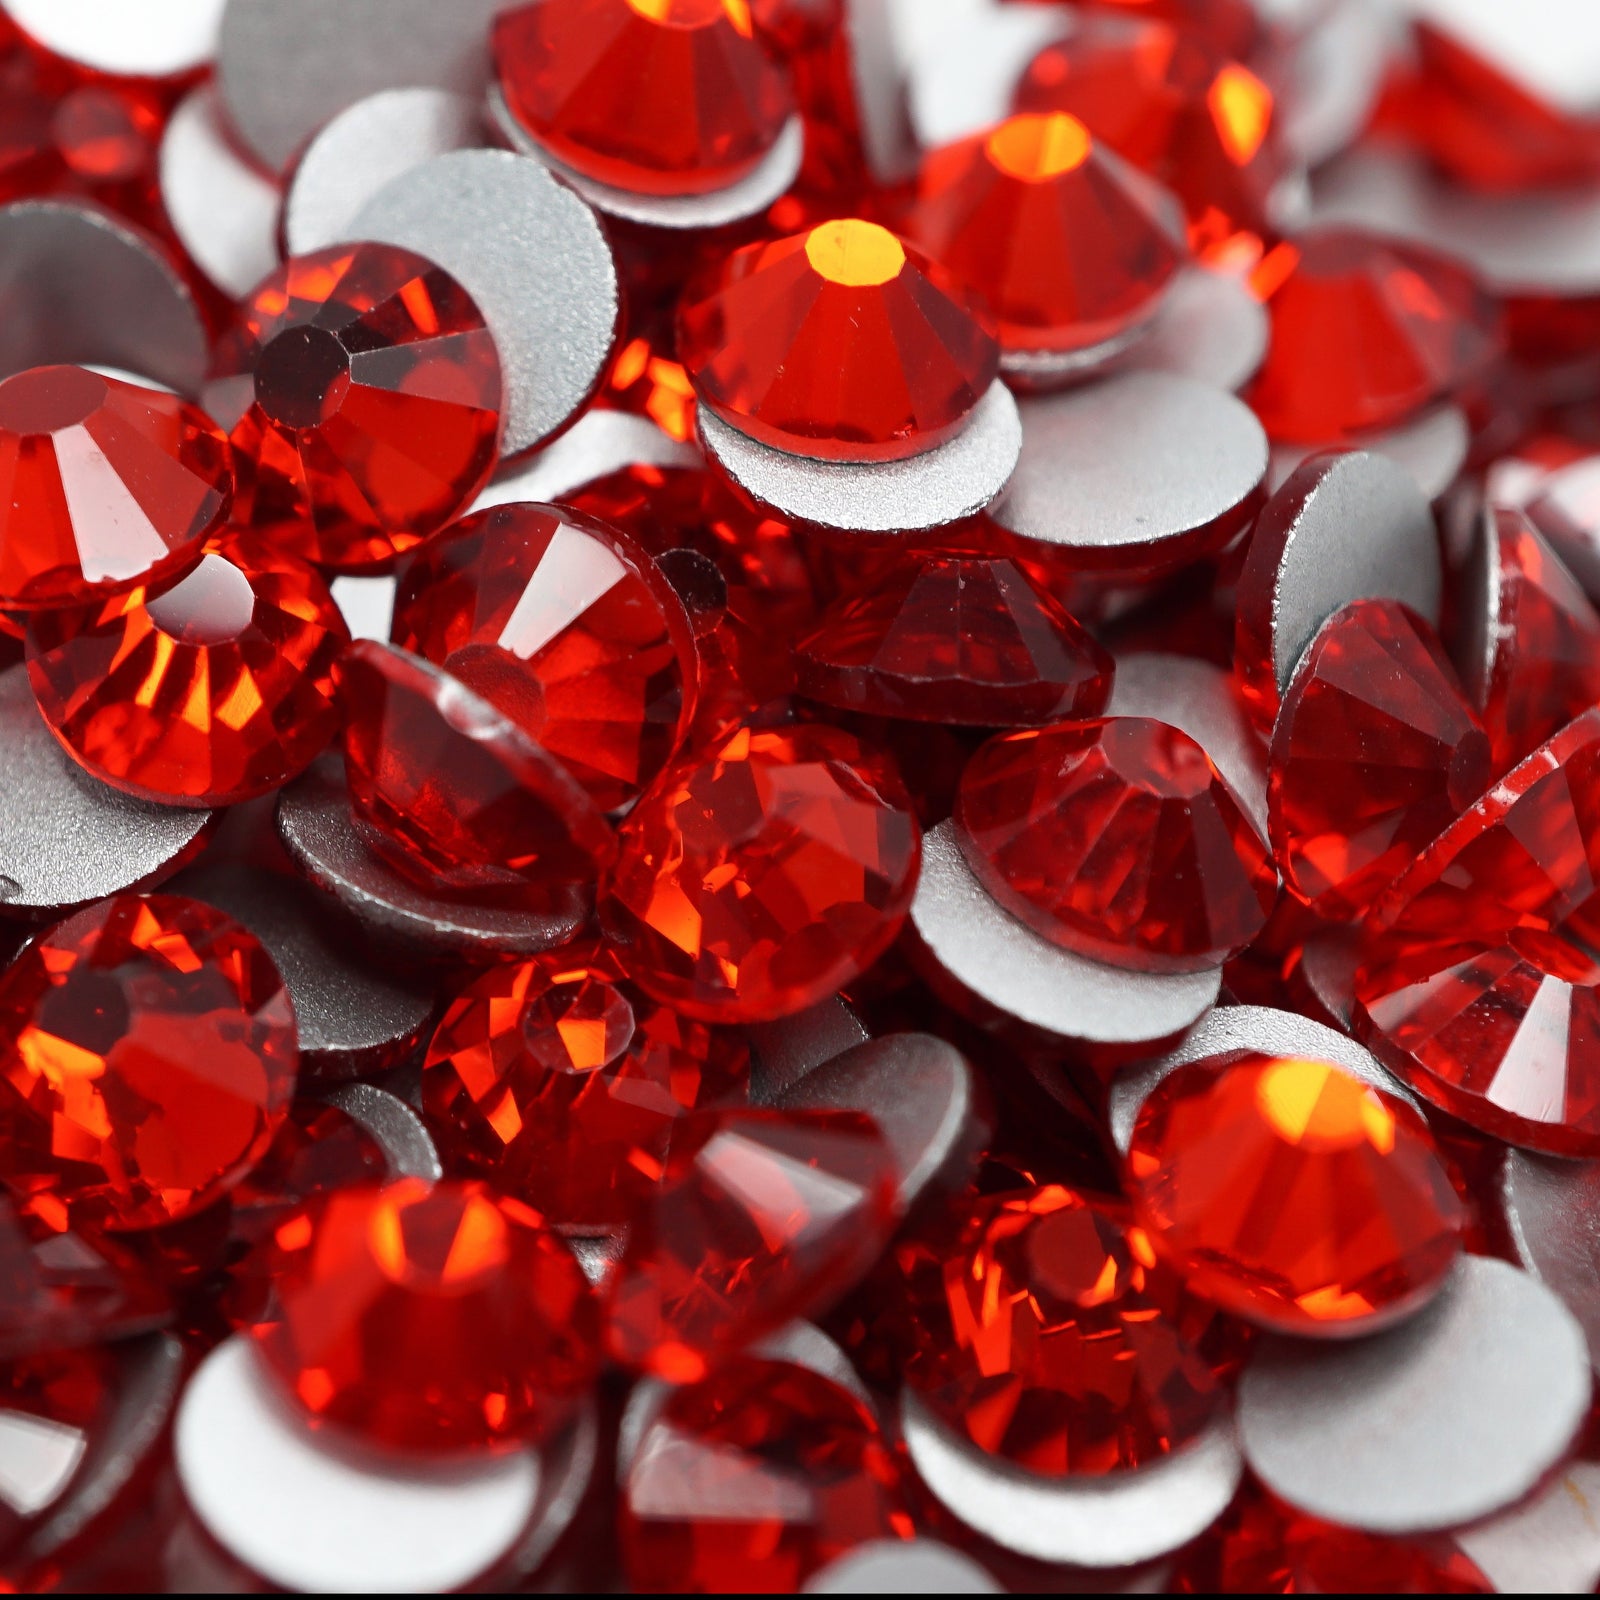 Light Siam Red Rhinestones Glass Non Hot Fix / Glue on Gems / Crystals of  Tumblers / Flat Back / Crystals for Bedazzling 